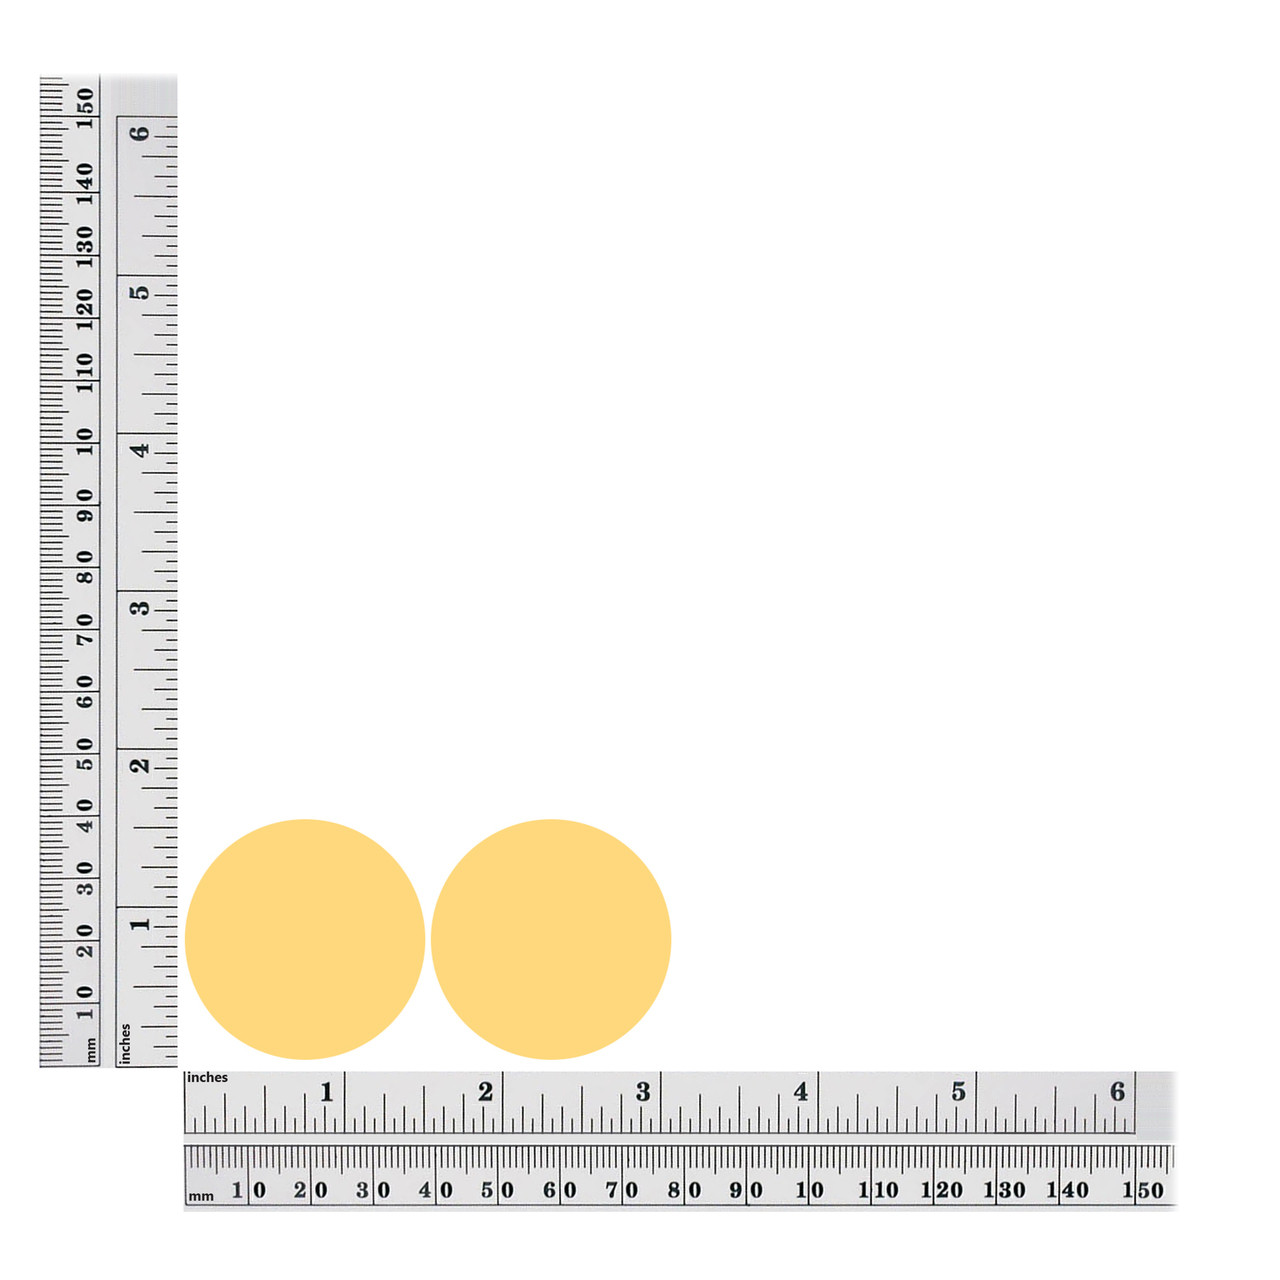 1-5-inch-sequins size chart